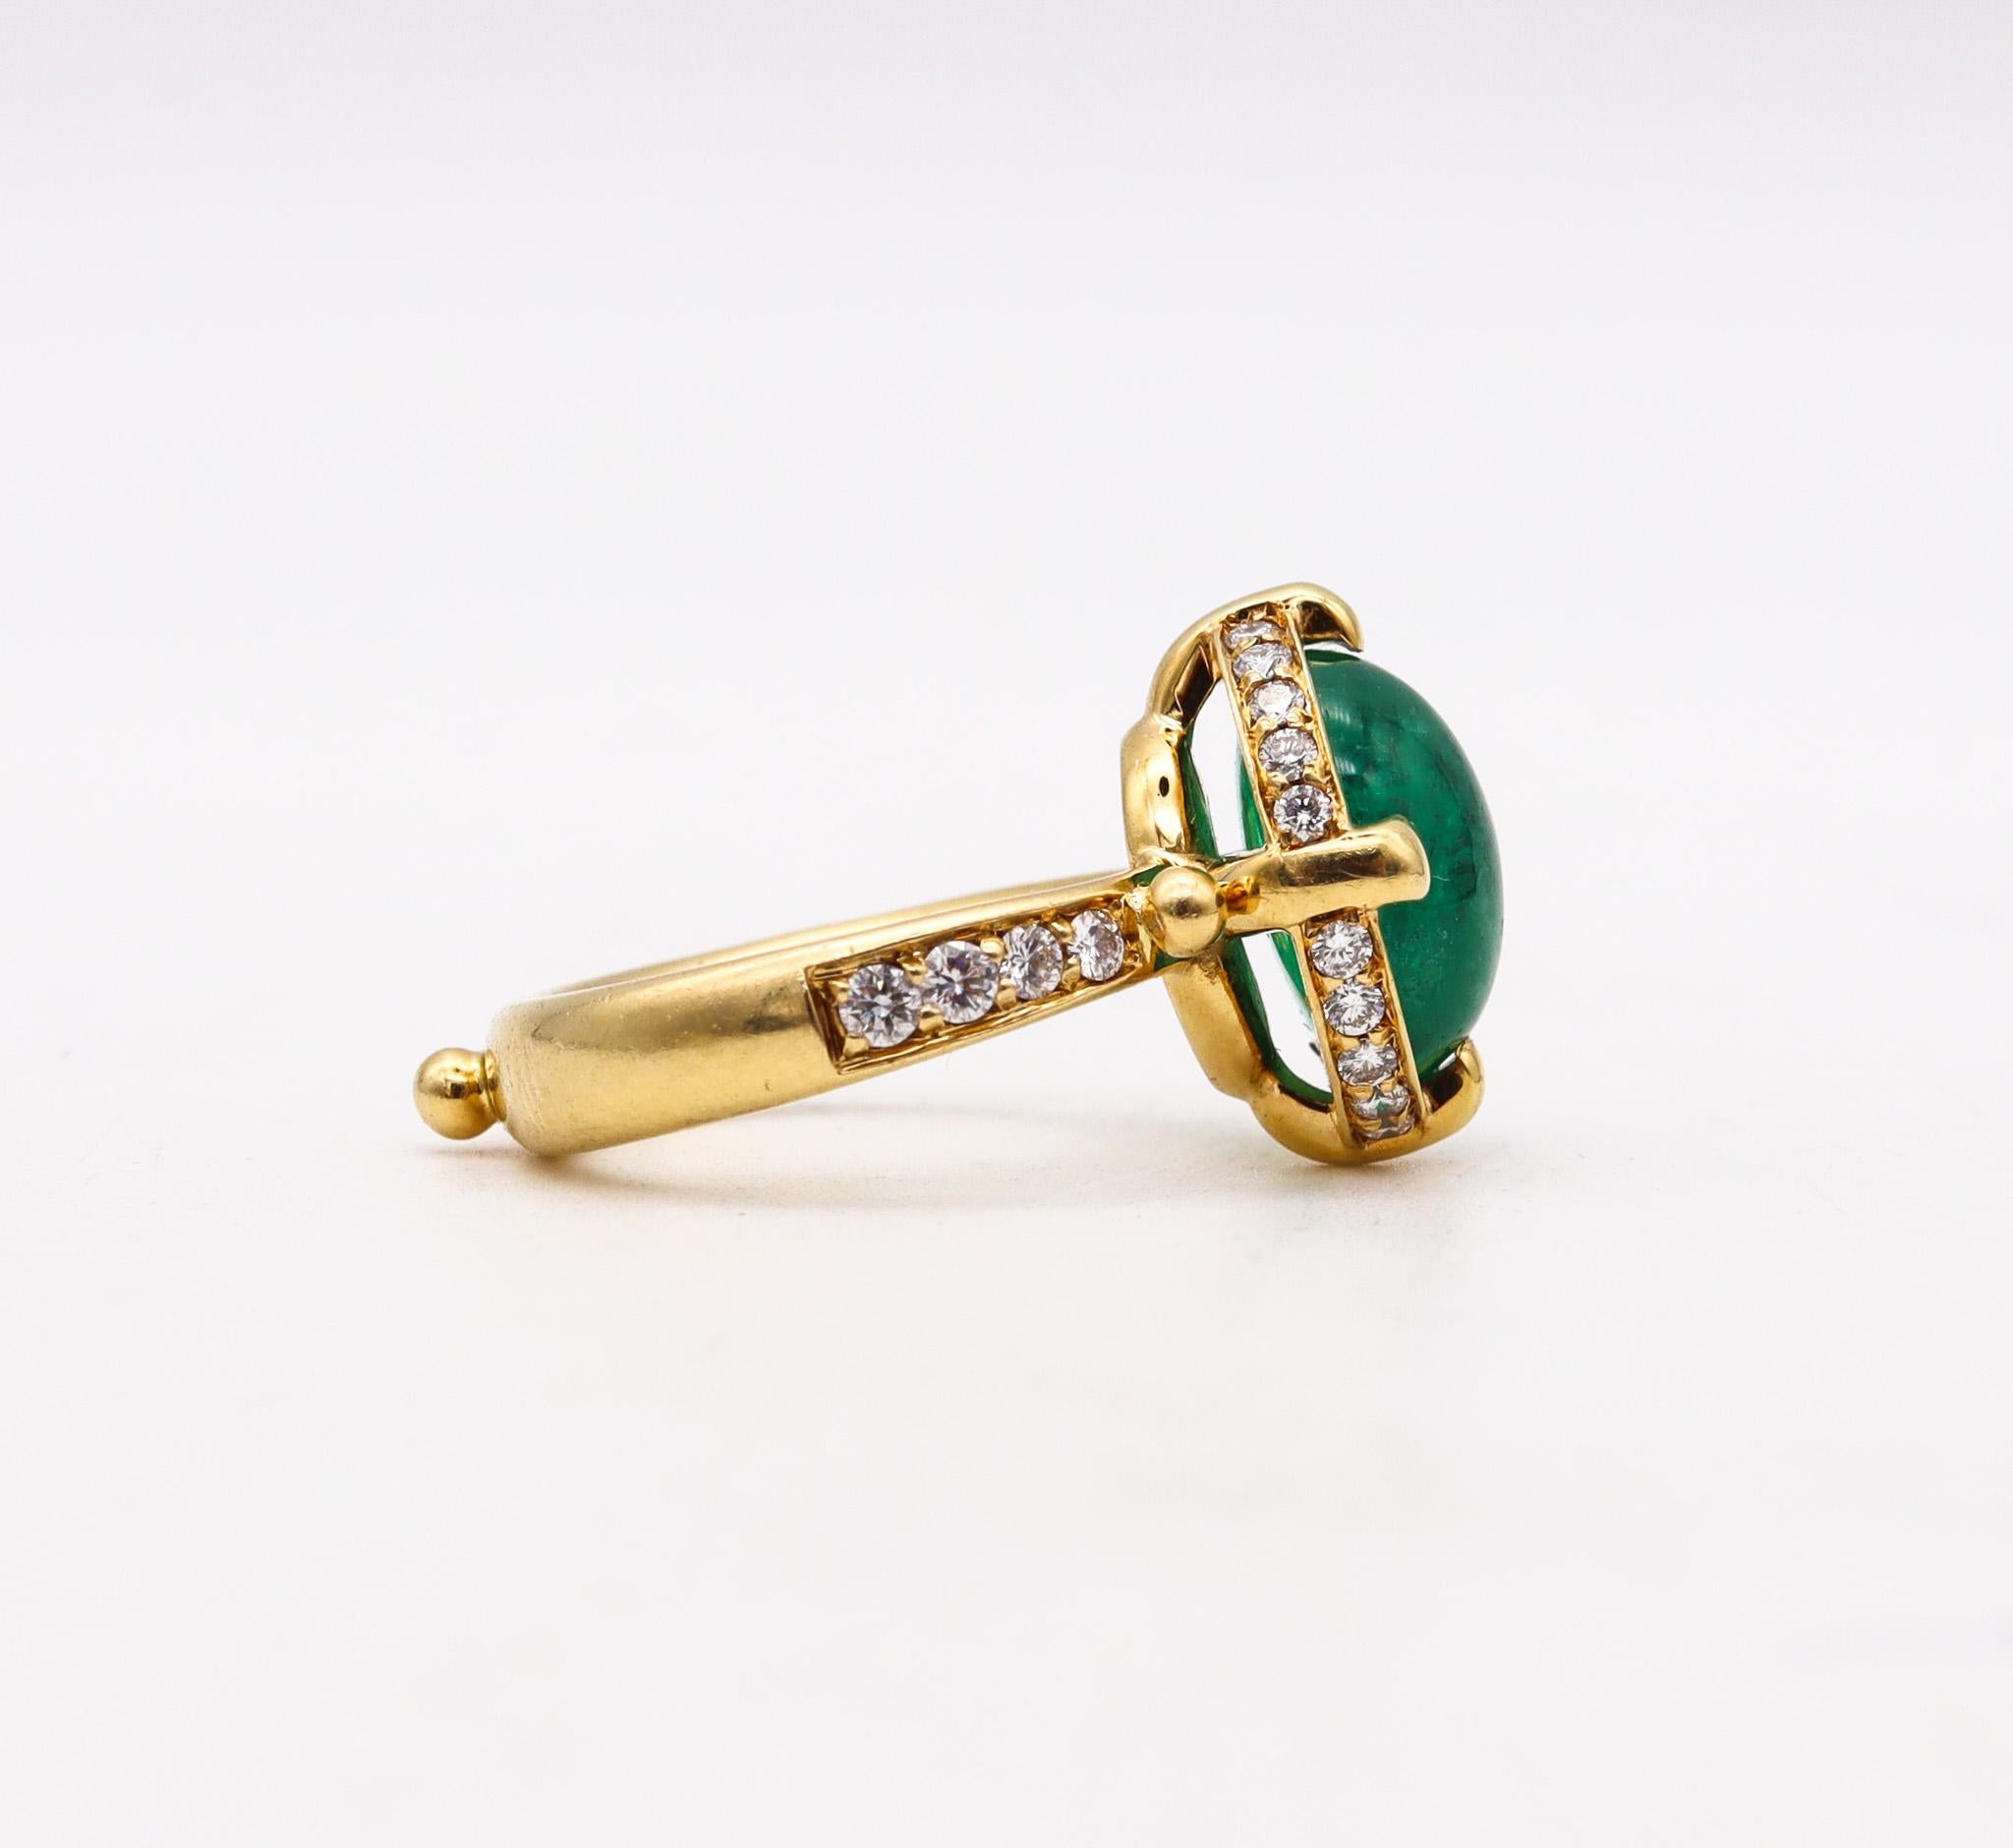 Brilliant Cut Temple St Clair Cocktail Ring 18Kt Yellow Gold With 6.20 Ctw Diamonds & Emerald For Sale